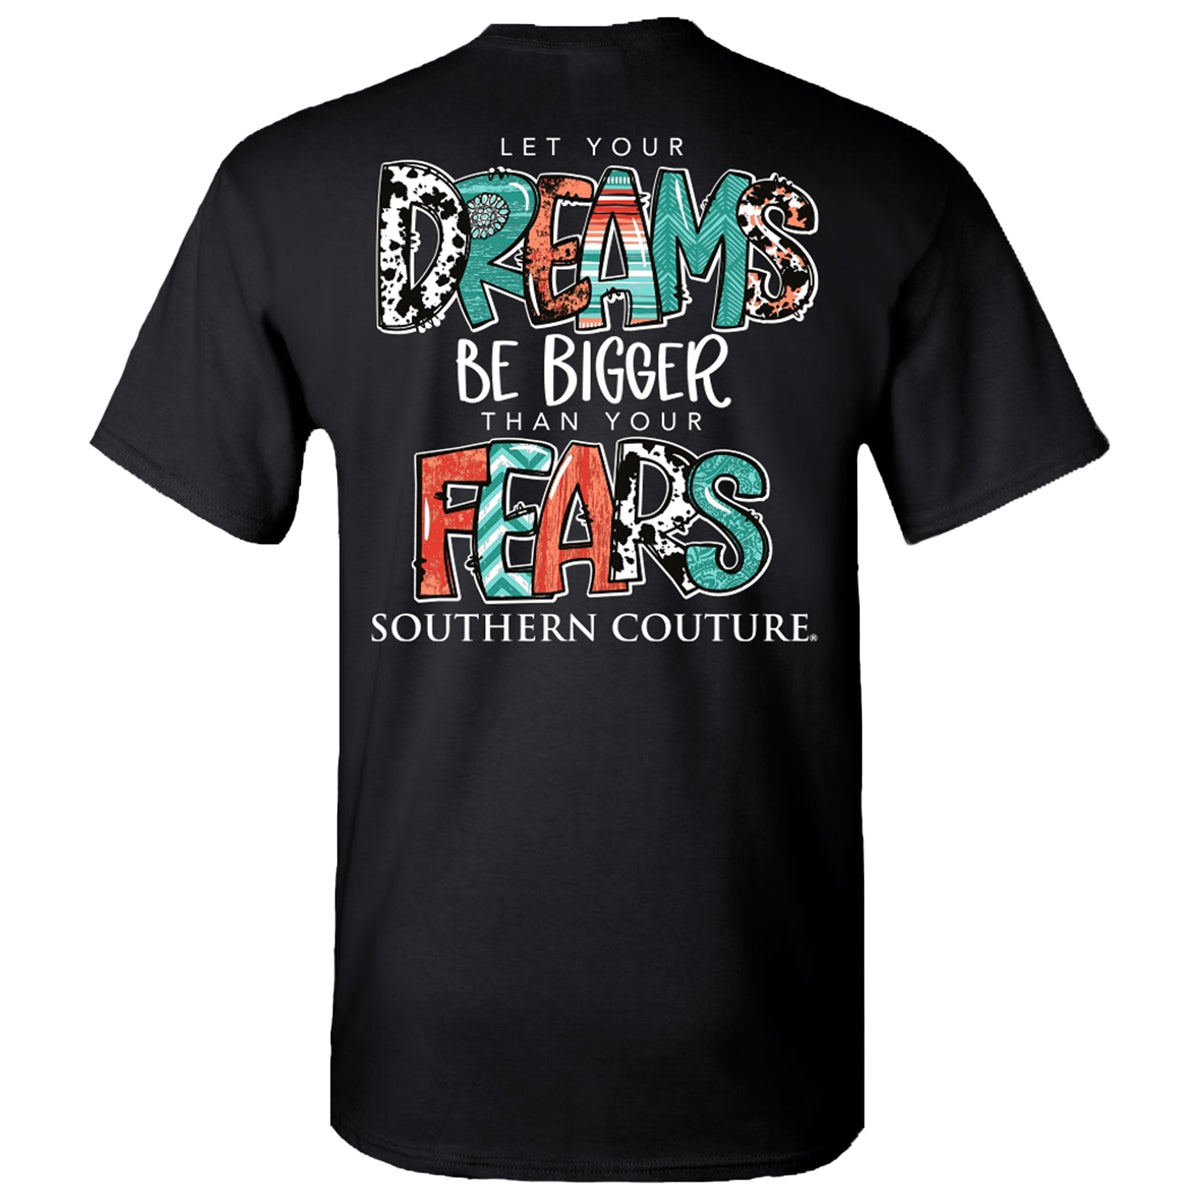 Southern Couture Classic Dreams Be Bigger T-Shirt